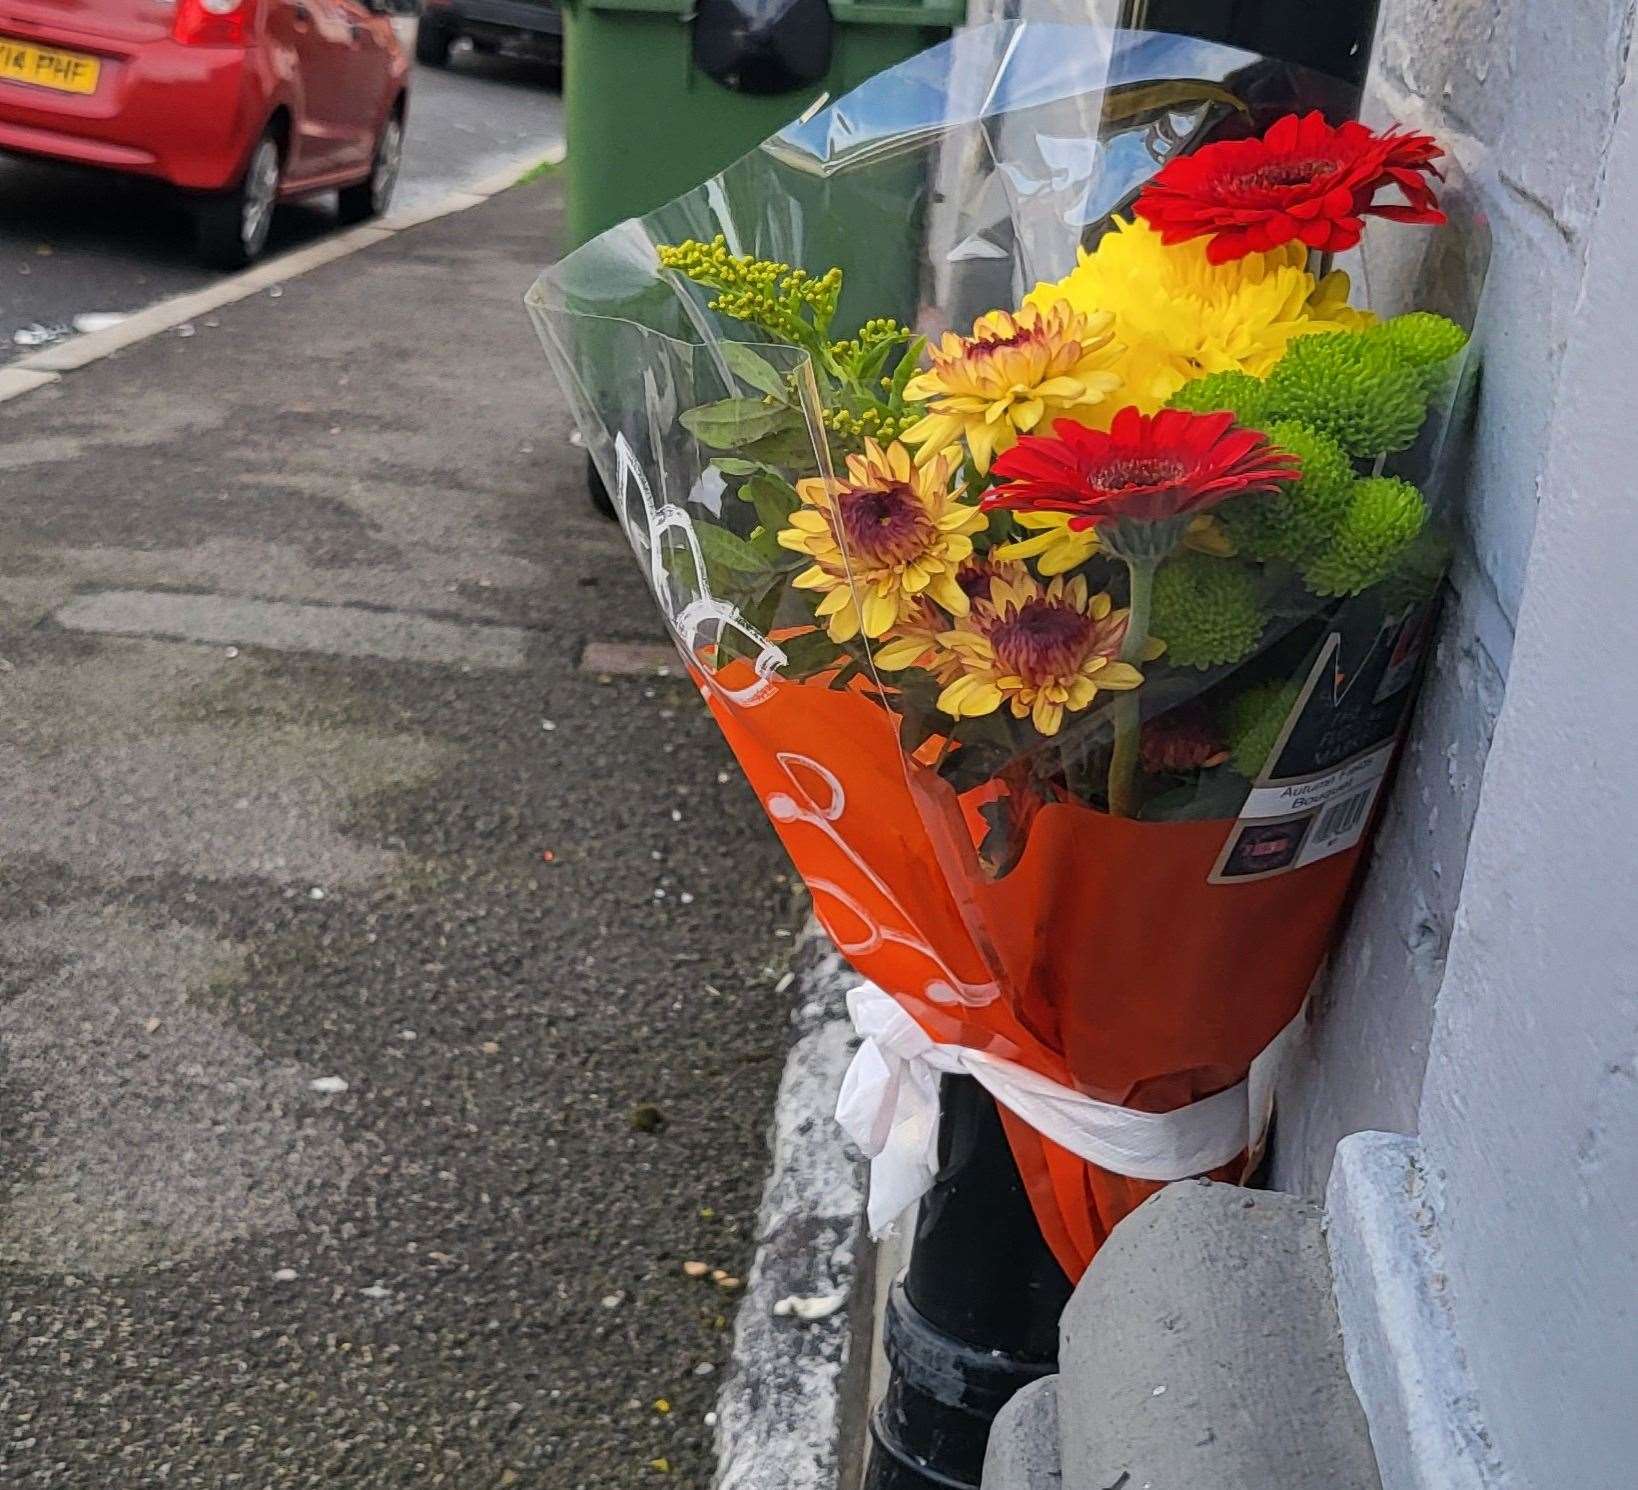 A floral tribute to Anthony Armstrong was placed at the scene in New Street, Folkestone, where he died after the fatal attack. Inset, Ruben Smith who was jailed for a year